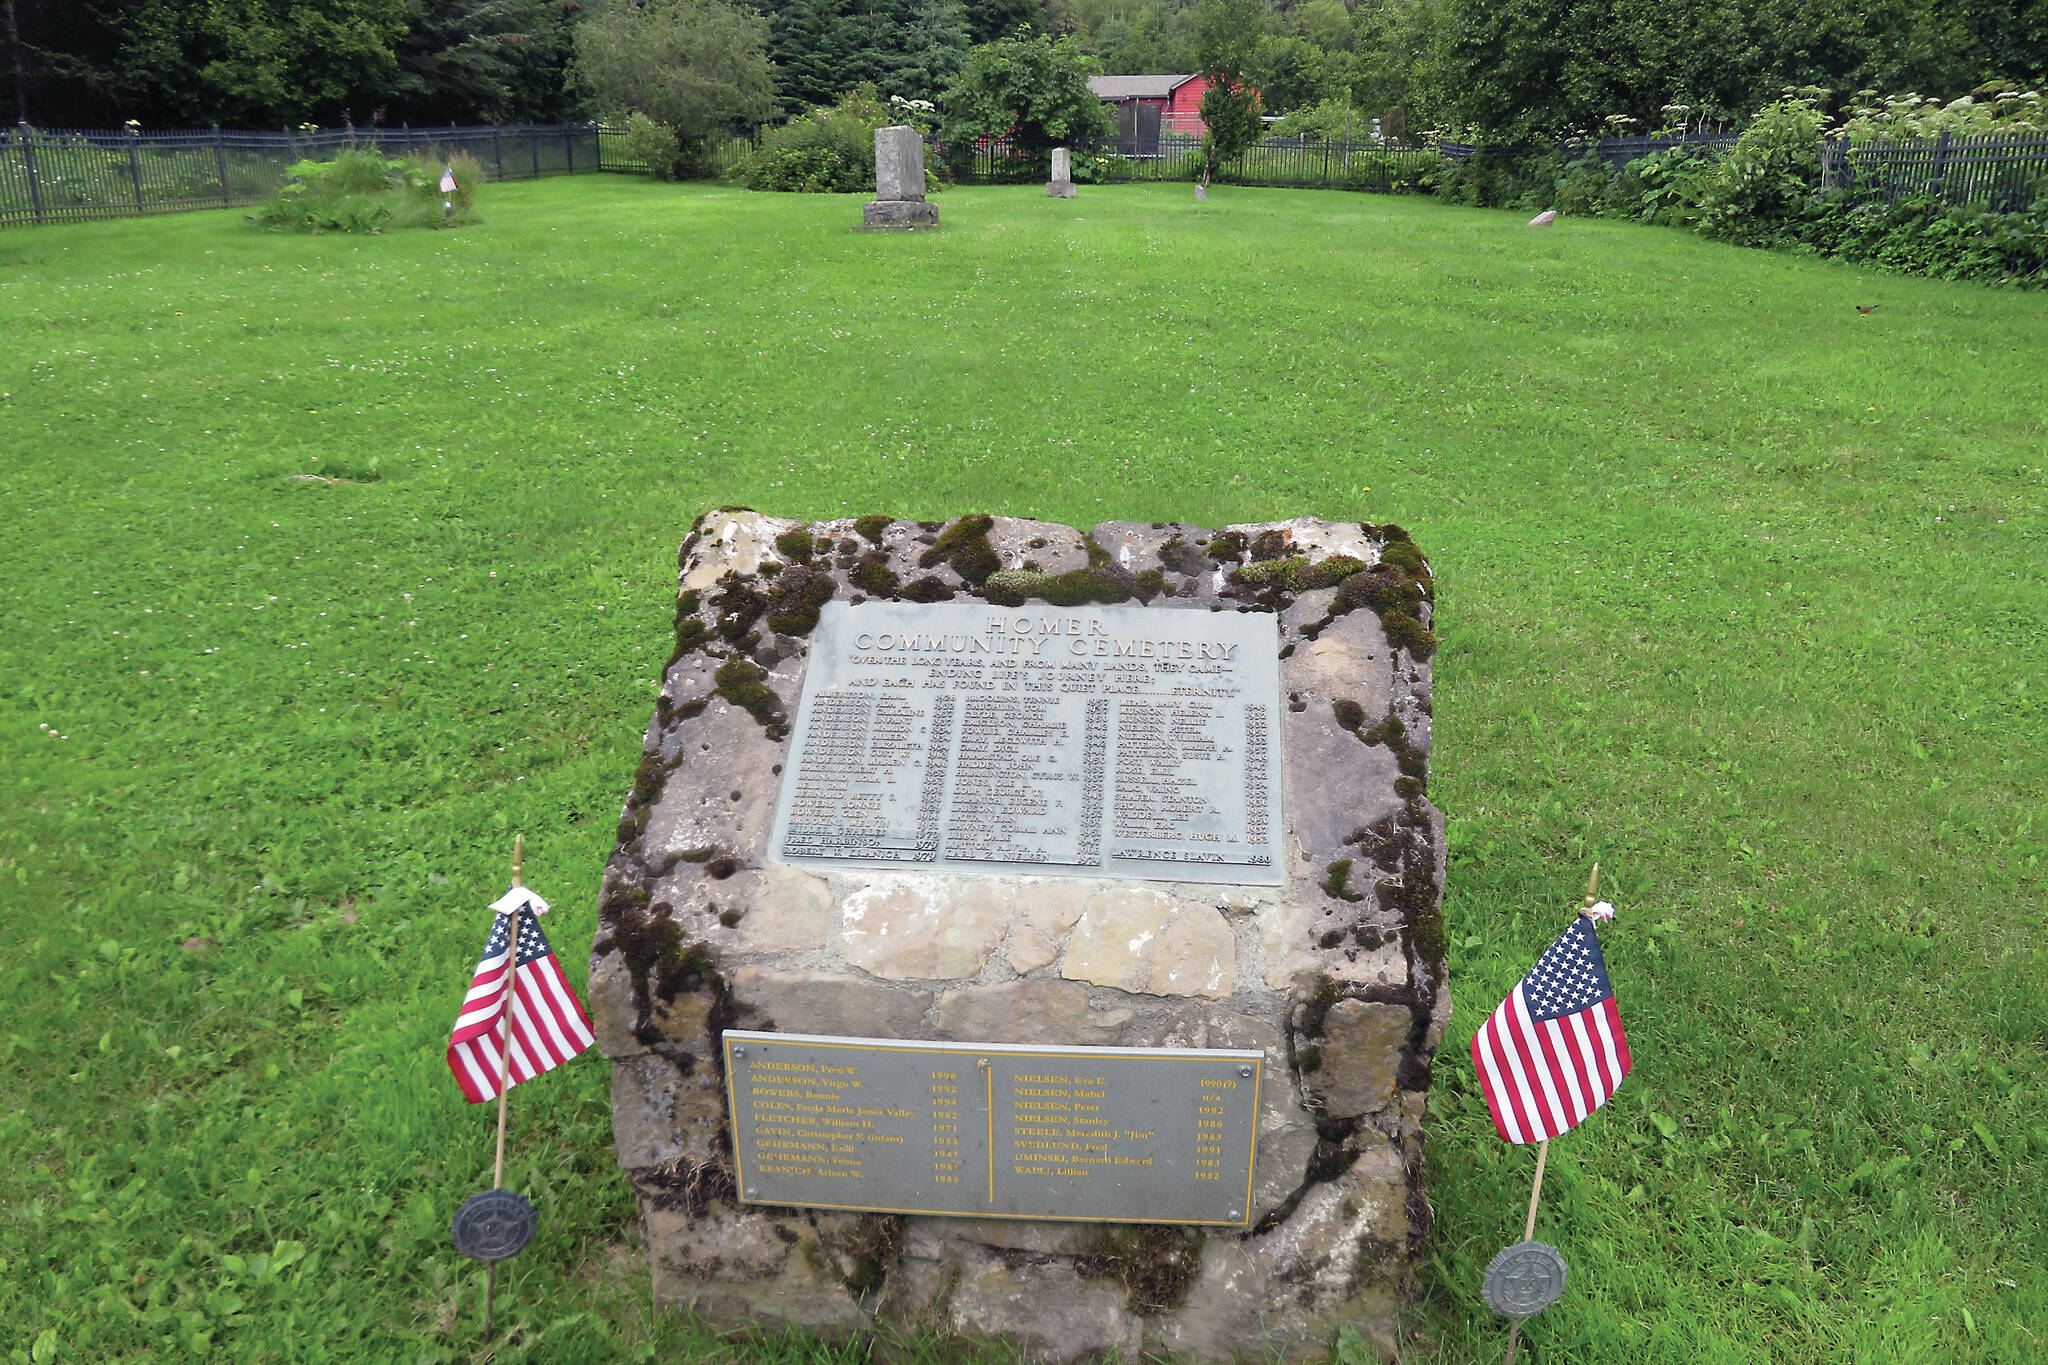 This plaque was created in the 1980s to memorialize persons known to have been buried in Homer Community Cemetery. The plaque was considered necessary because so many of the graves here had lost their markers or had never been marked. (Clark Fair photo)